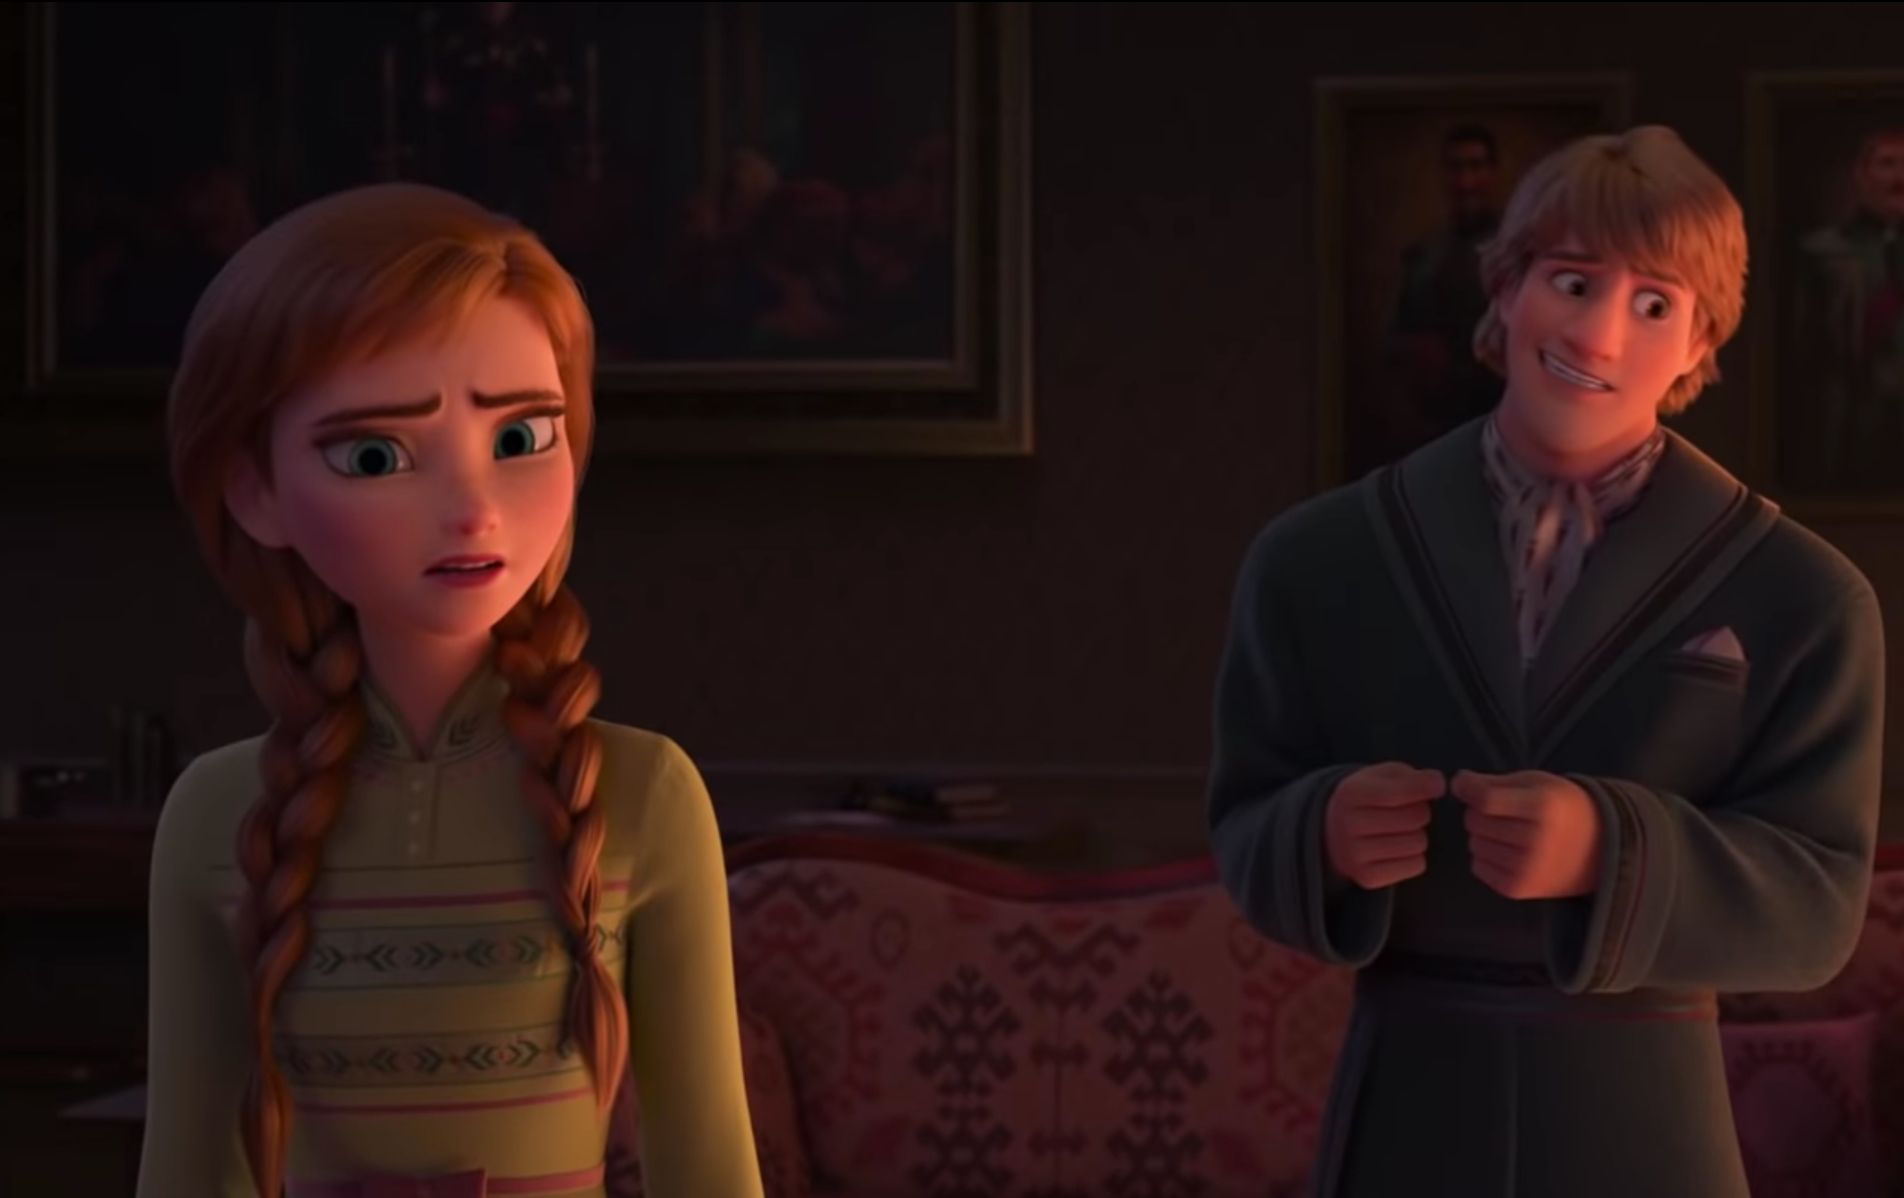 10 Easter Eggs From Frozen 2 The Makers Slid In Images, Photos, Reviews